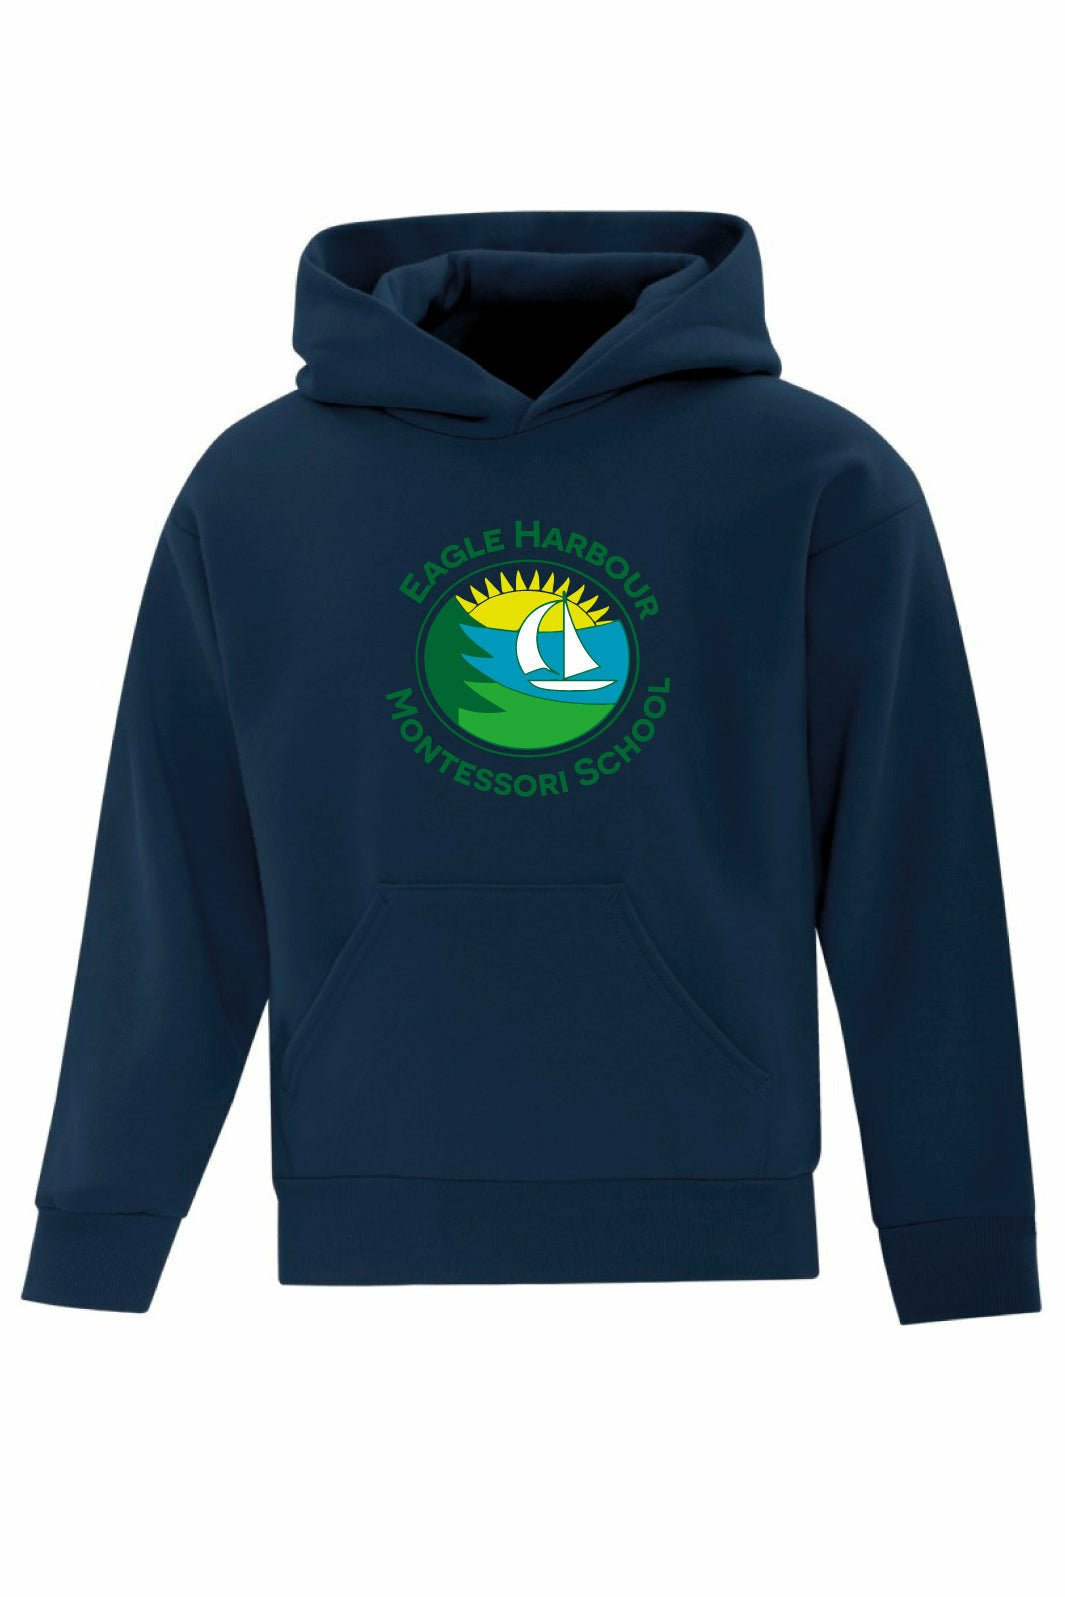 Eagle Harbour Logo Pullover Hoodie (Youth) - Oddball Workshop